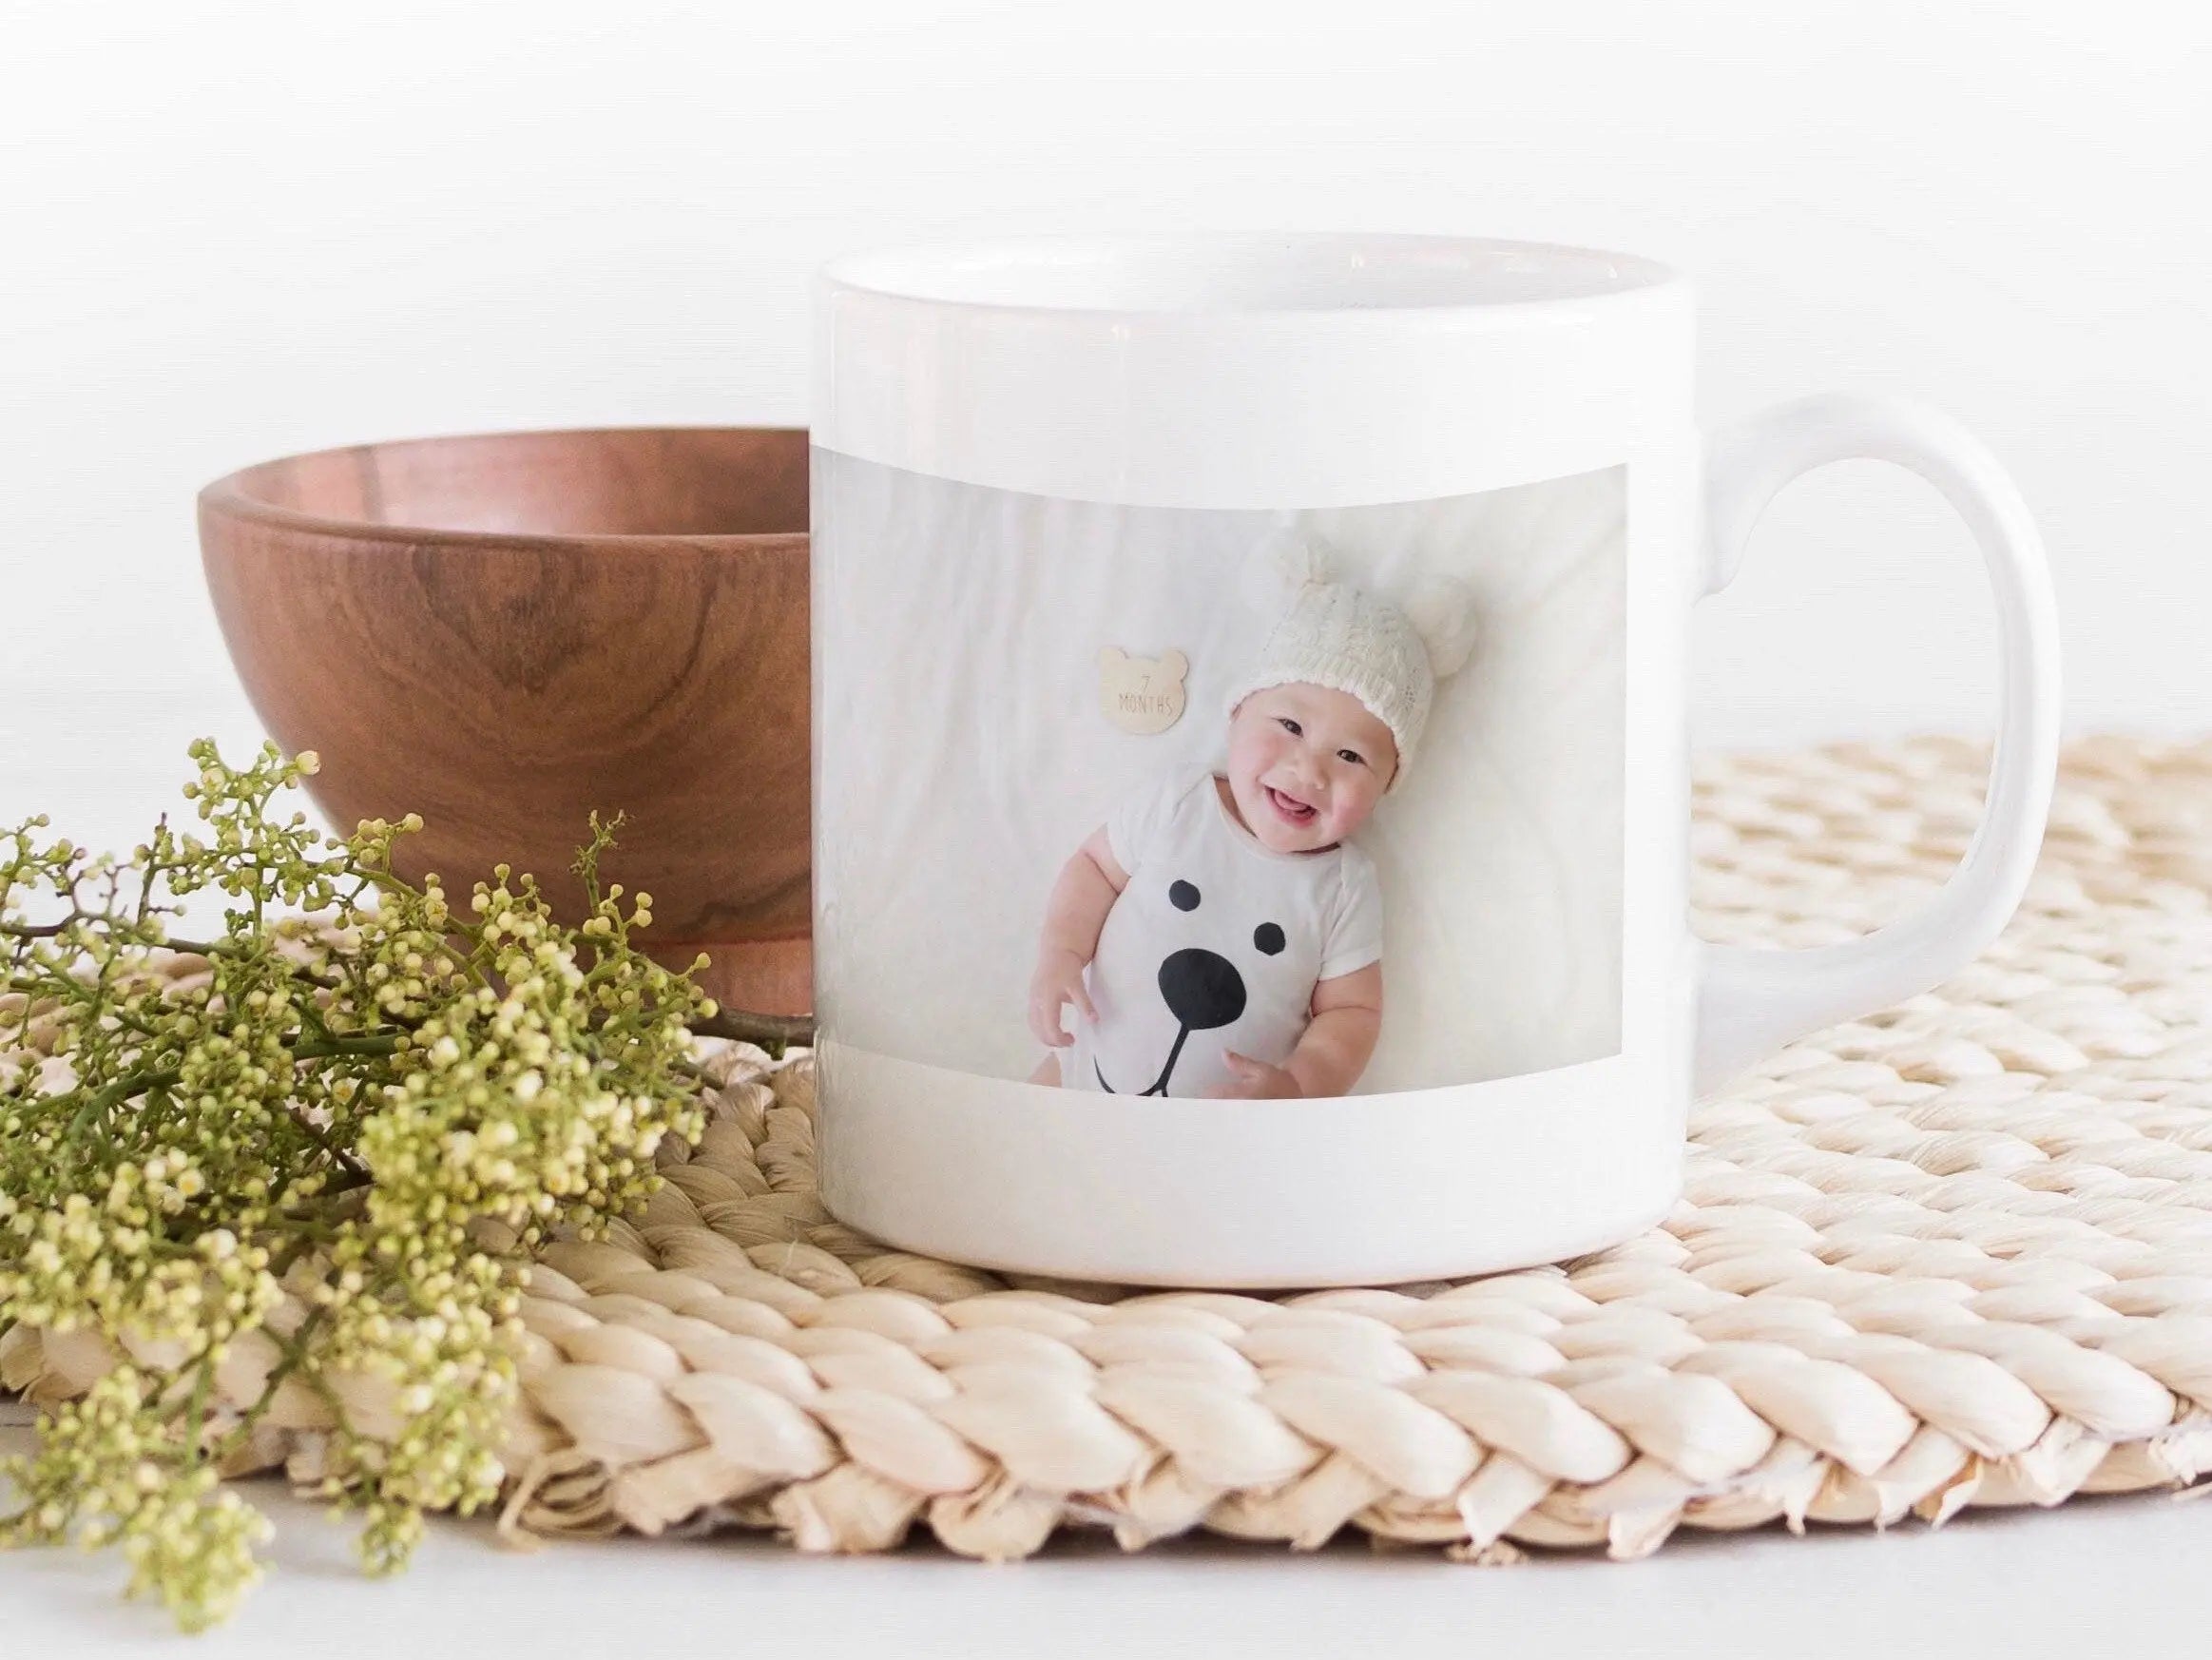 Personalized Gifts | Create Photo Gifts | Shutterfly